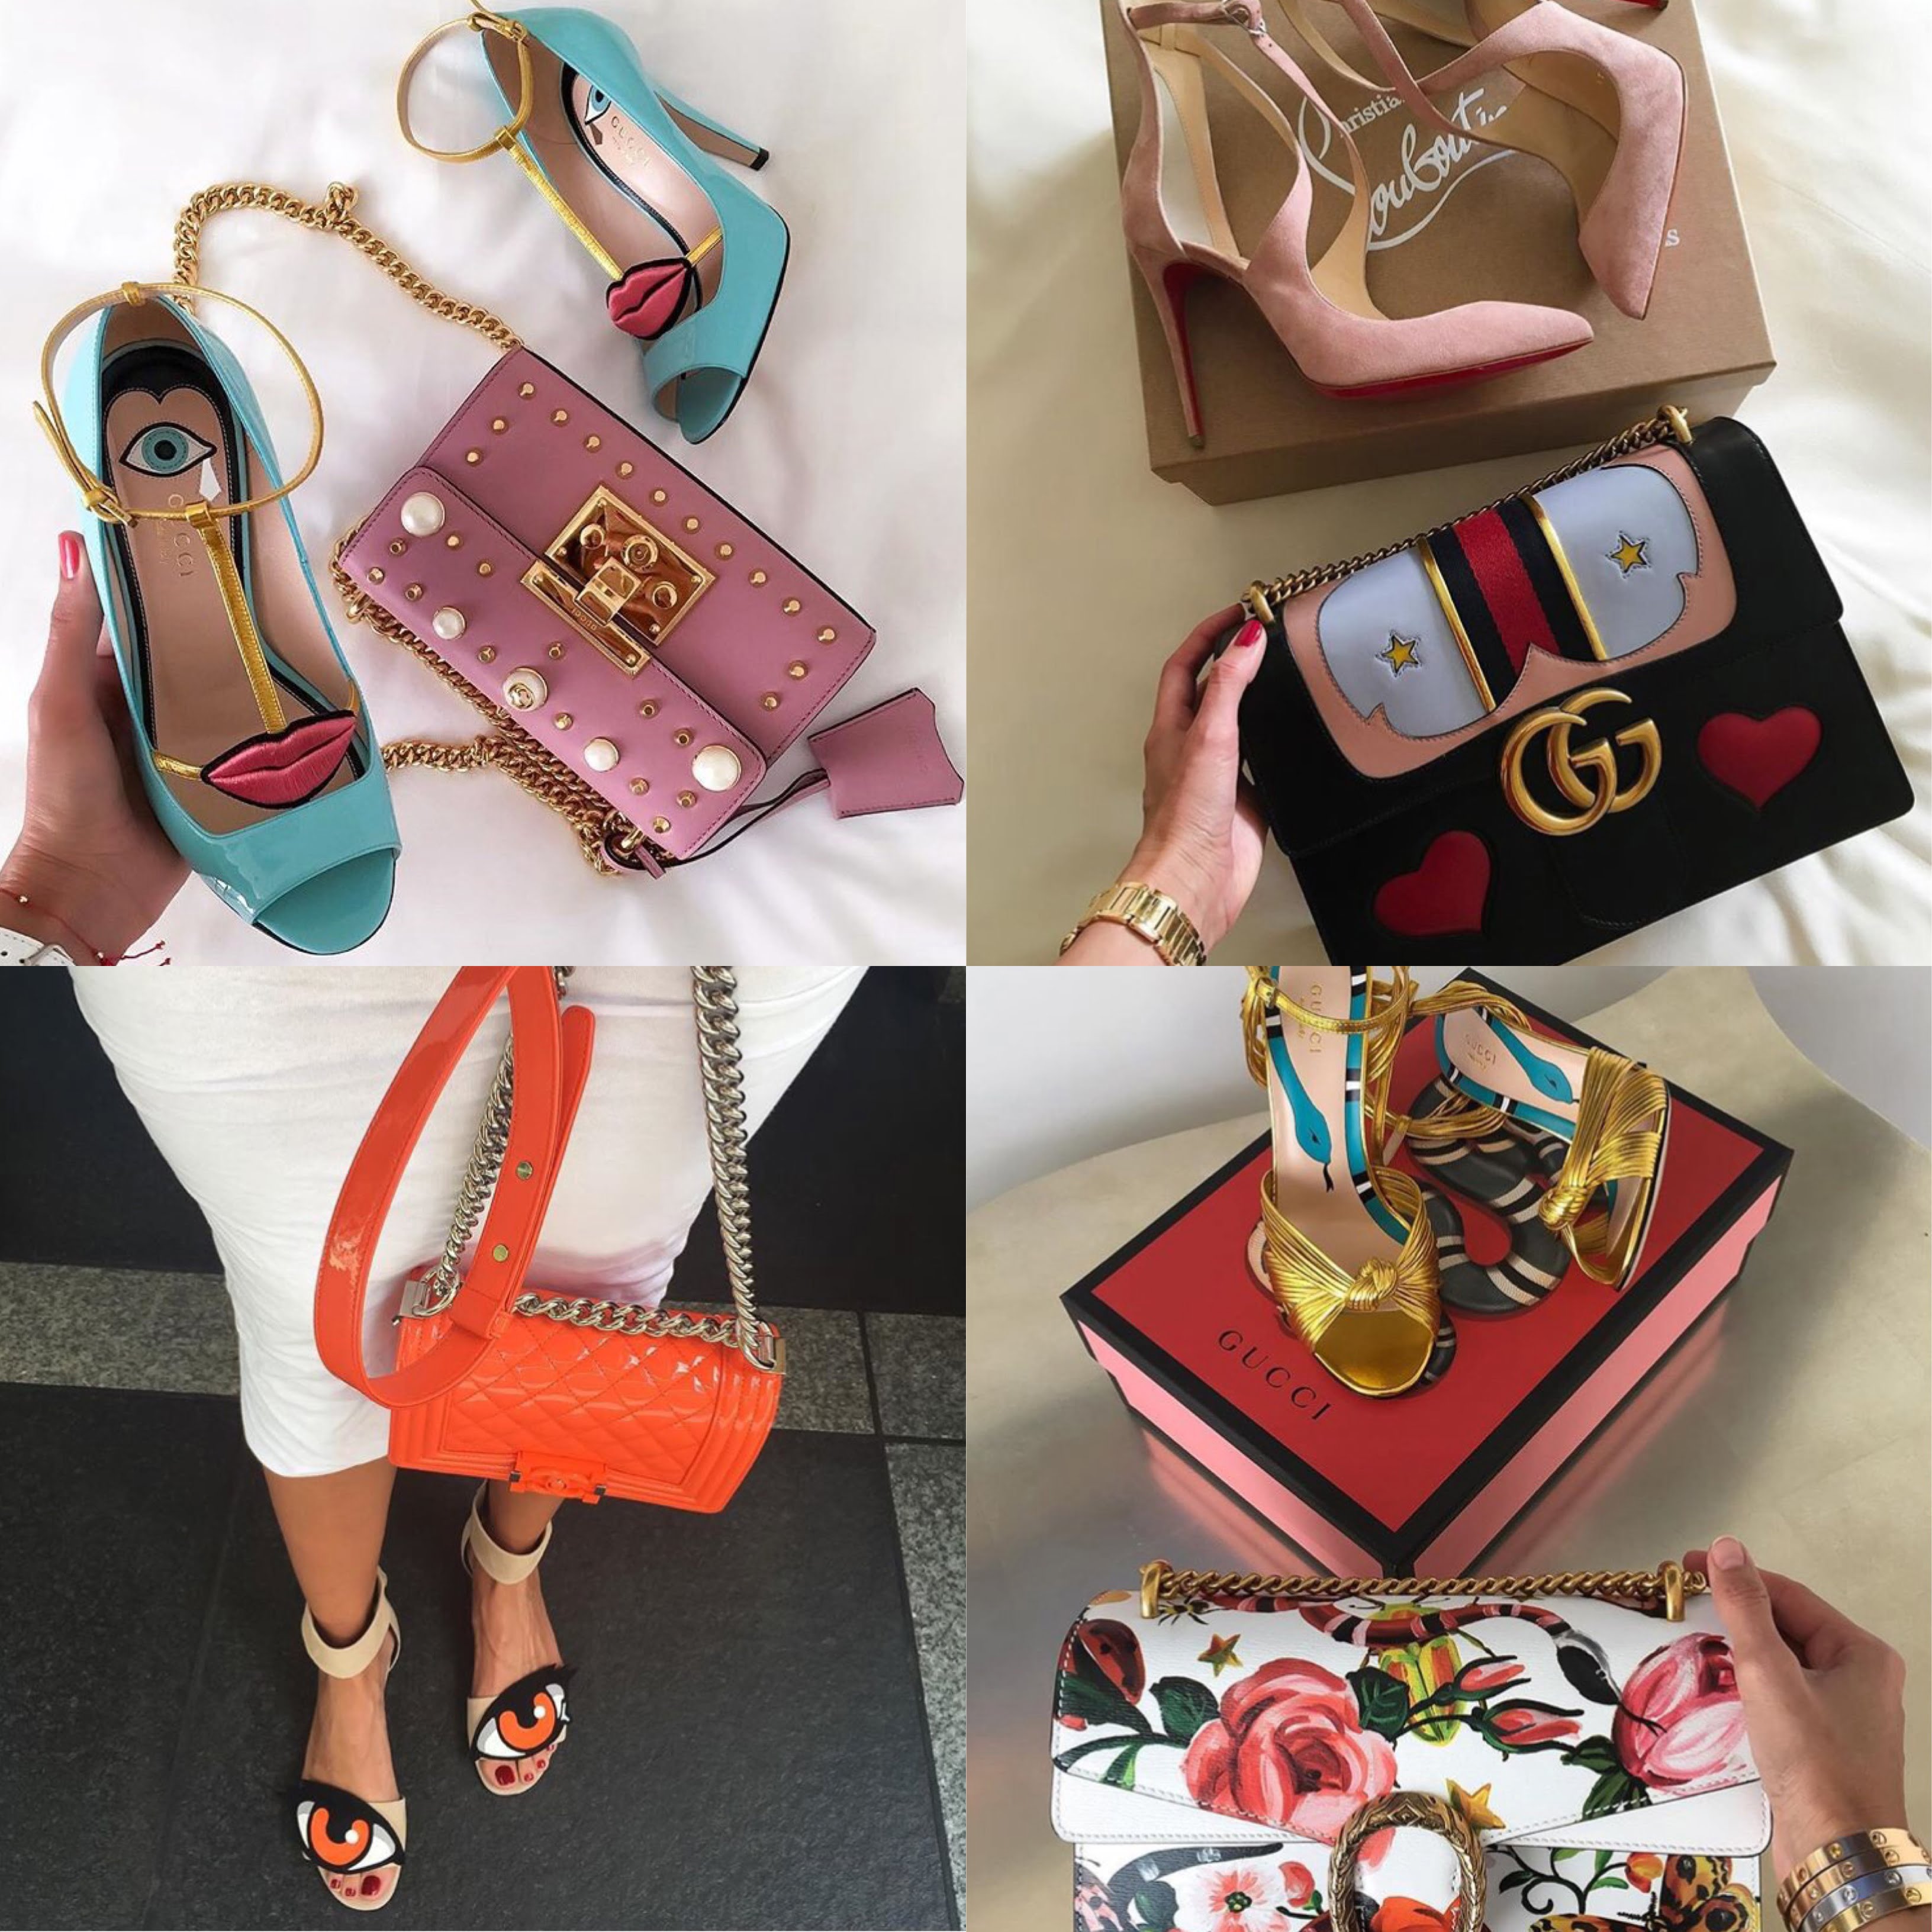 Shoes and bags TR (@shoesandbags_tr) • Instagram photos and videos